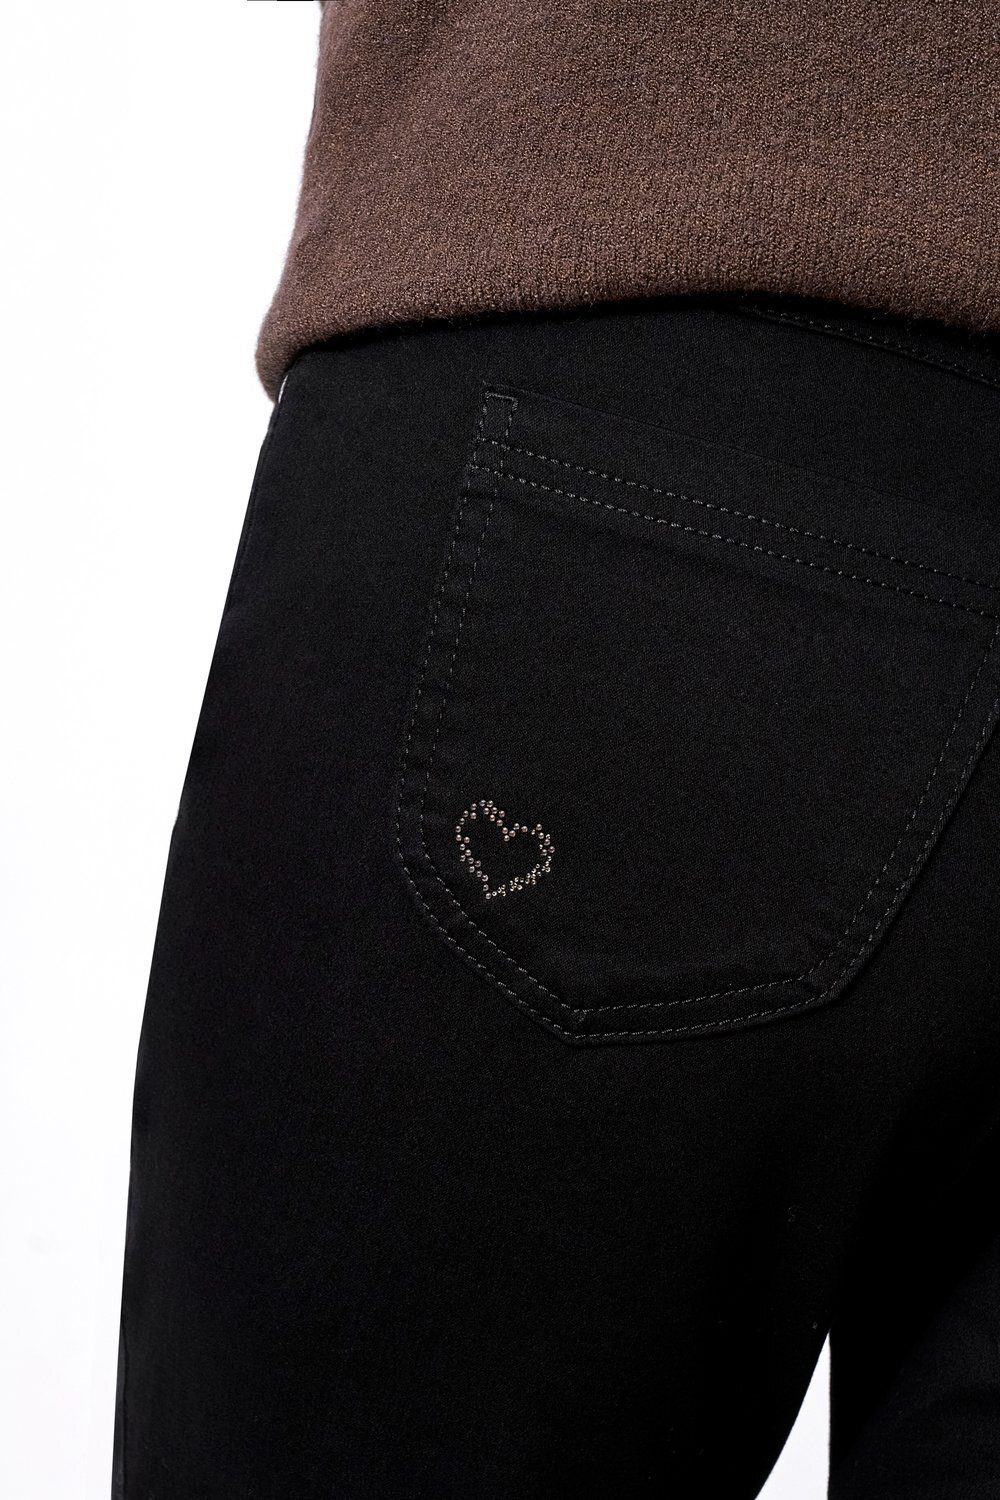 Relaxed by TONI in schwarz 891 My Passform - Love 5-Pocket-Hose legerer